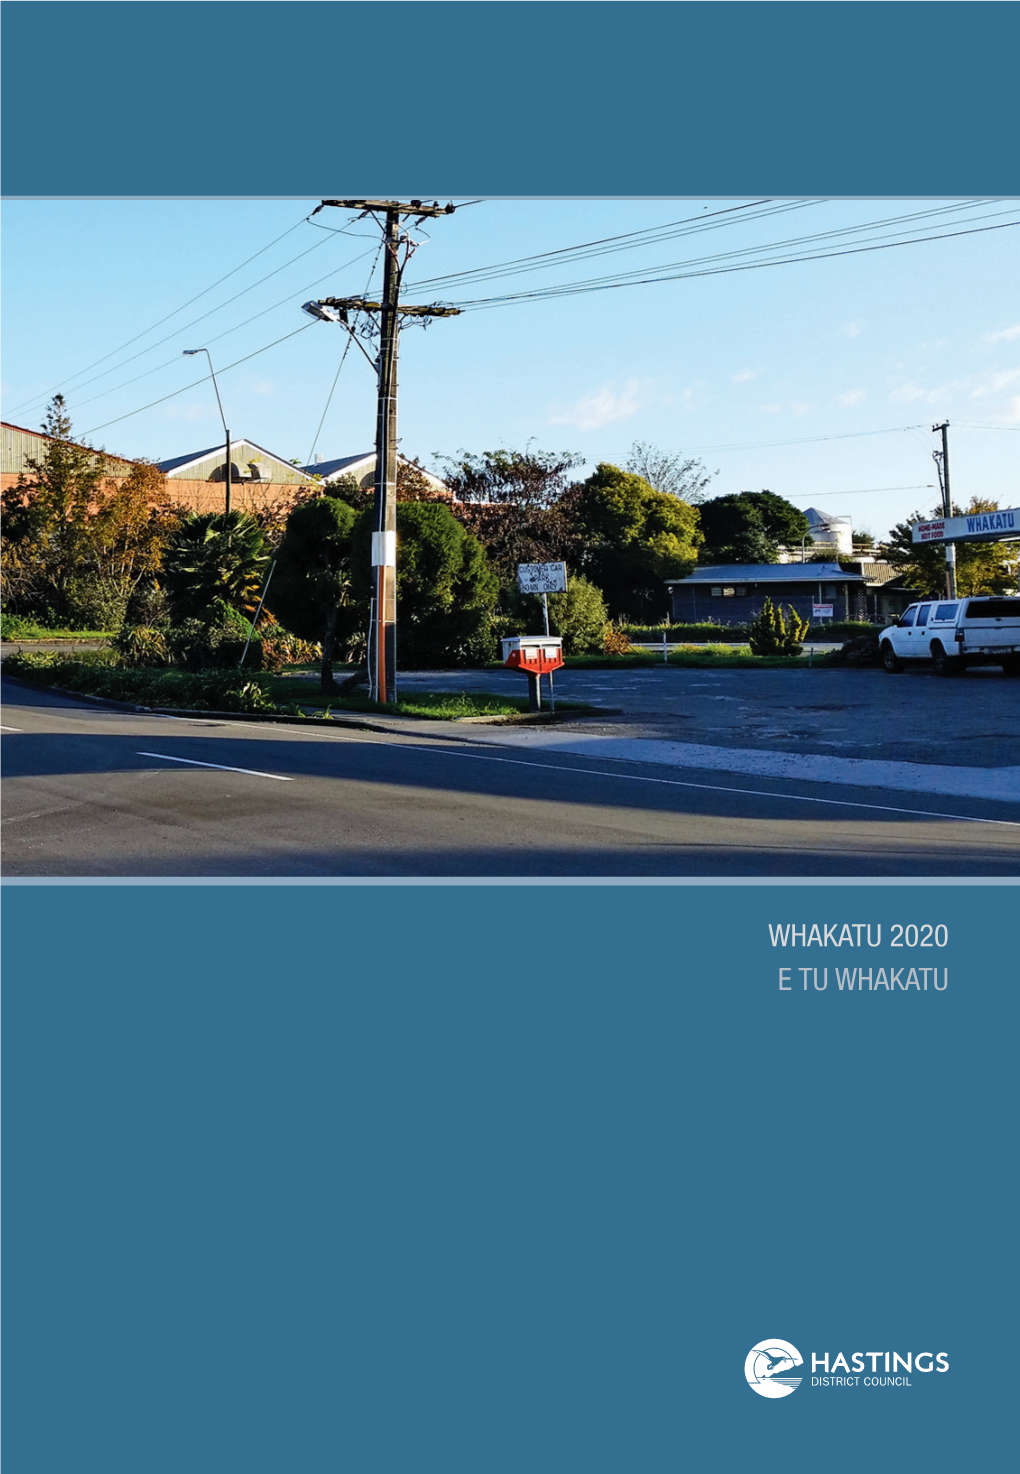 E TU WHAKATU for Further Information Contact the Economic and Social Development Team At: Hastings District Council Private Bag 9002 Hastings New Zealand Ph